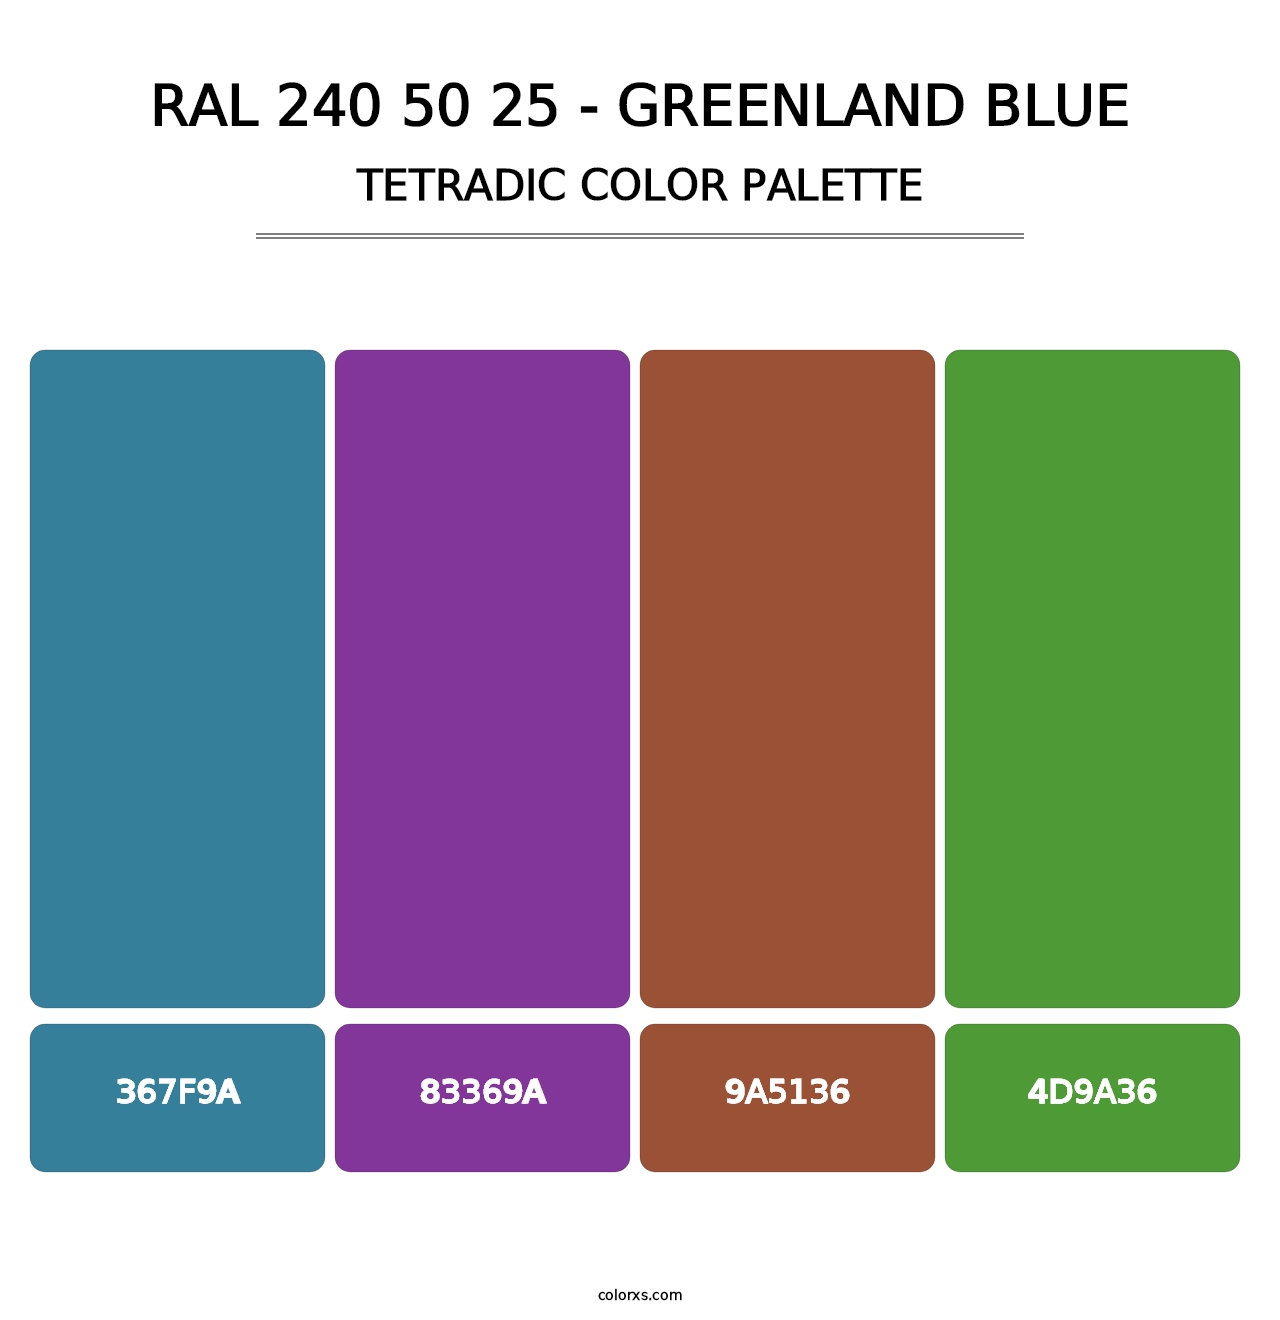 RAL 240 50 25 - Greenland Blue - Tetradic Color Palette